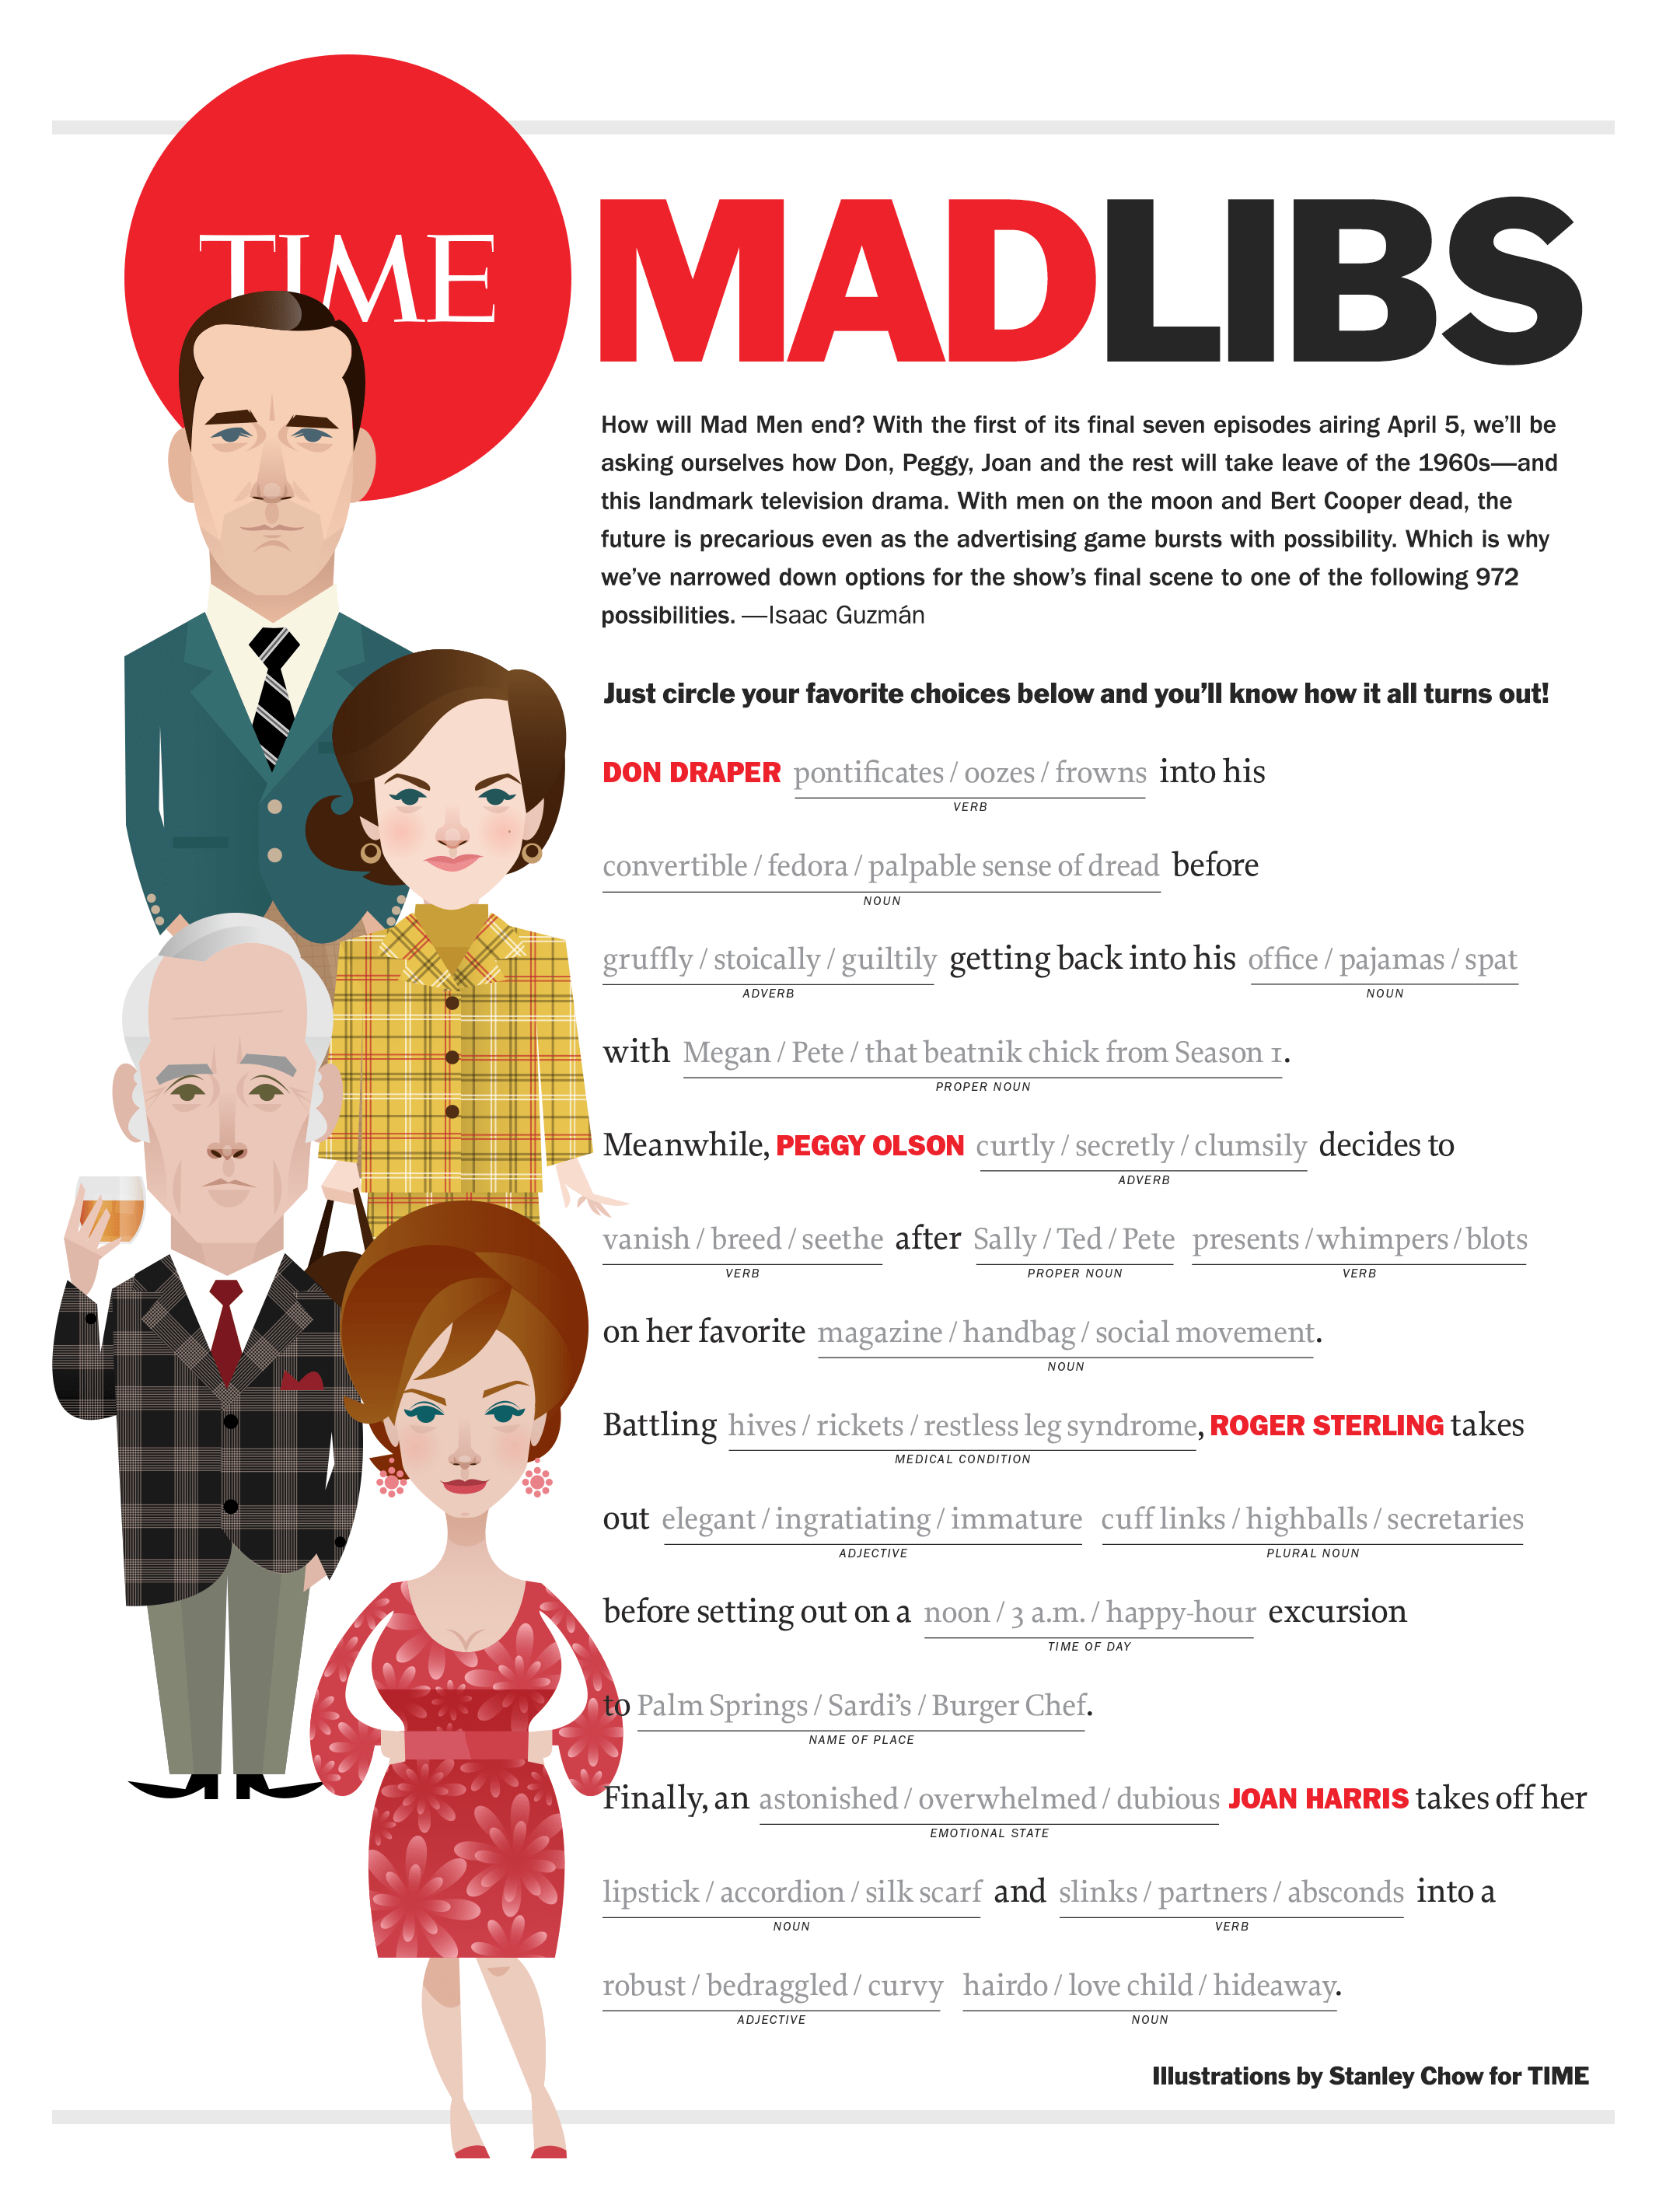 <a href="https://time.com/wp-content/uploads/2015/03/madlibs_2.png" target="_newblank">Click to see full size image</a>